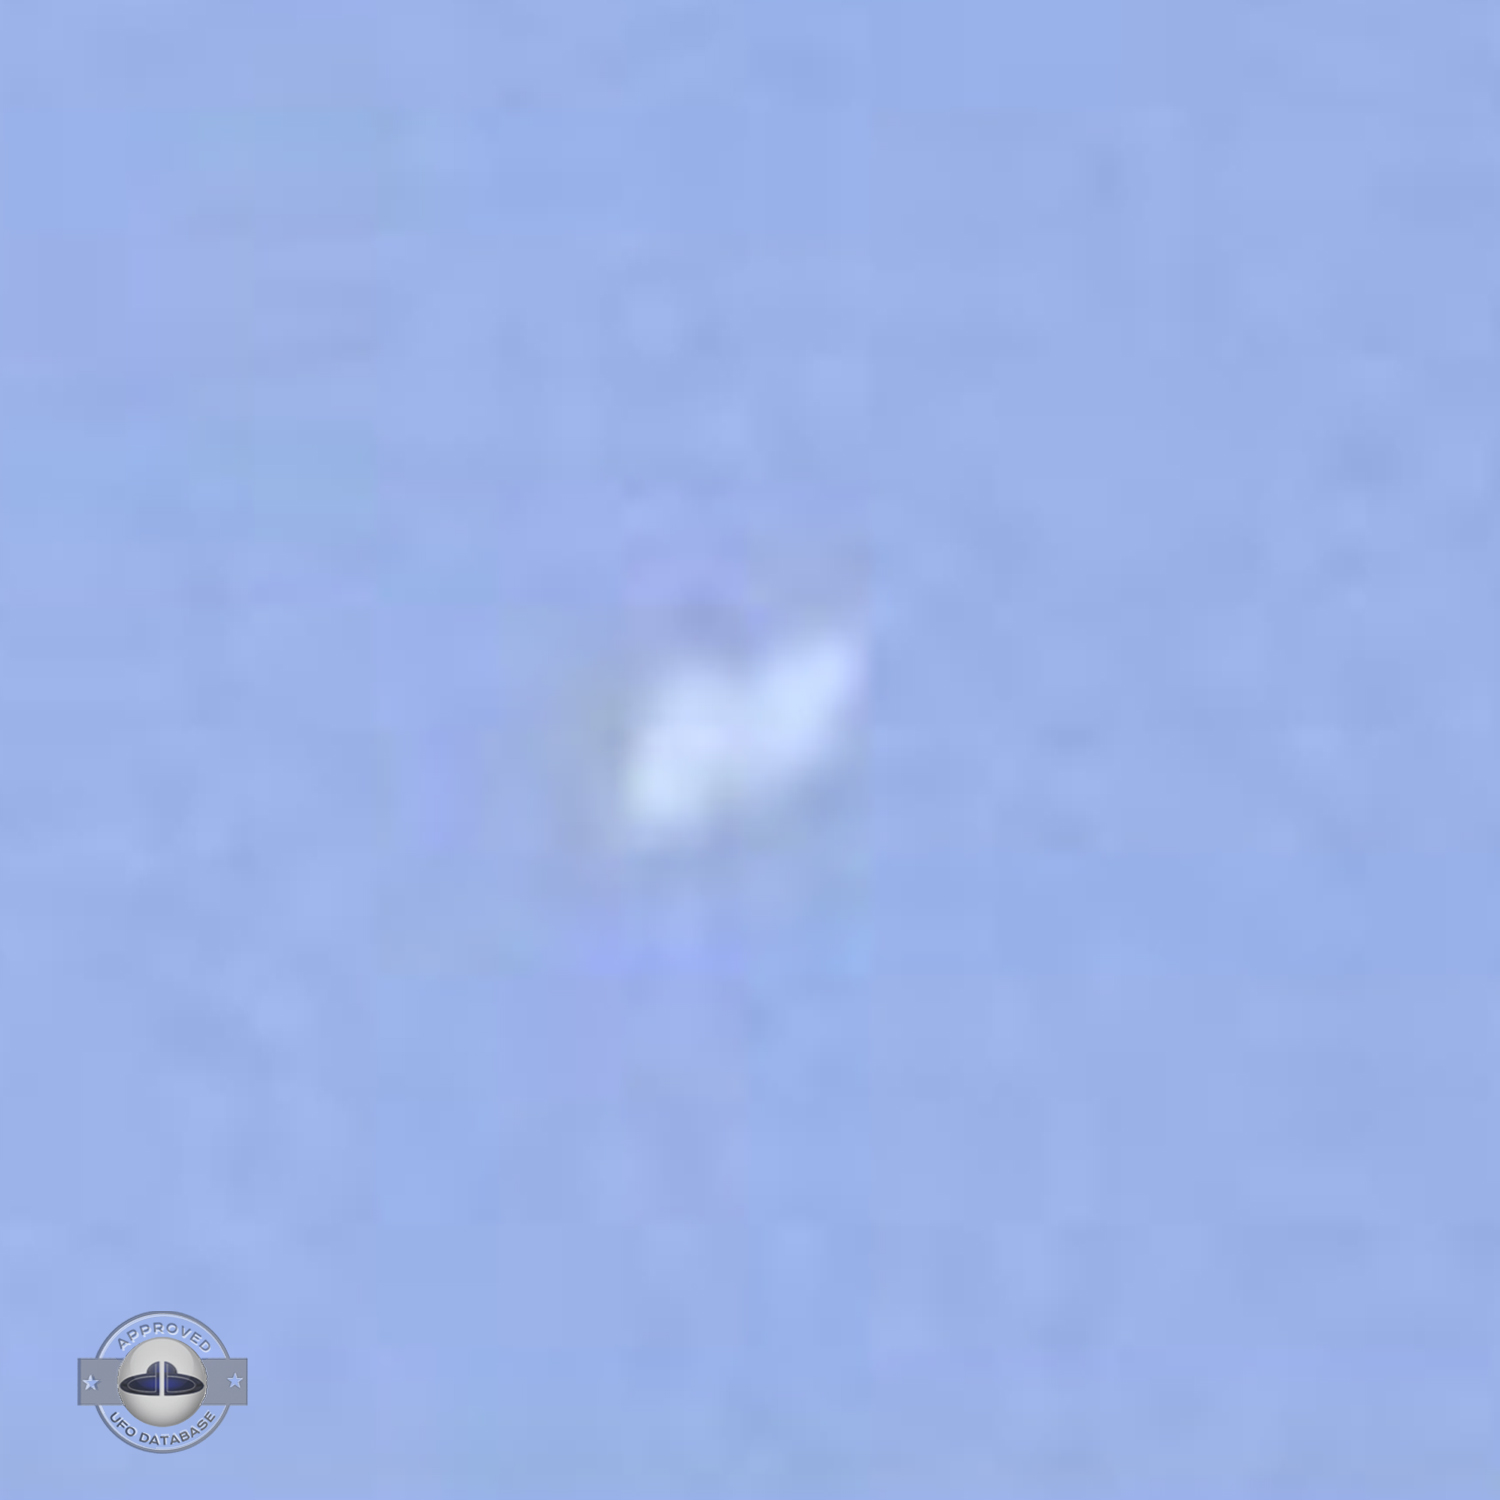 UFO in a blue sky near the pont des demoiselles in Toulouse UFO Picture #11-4